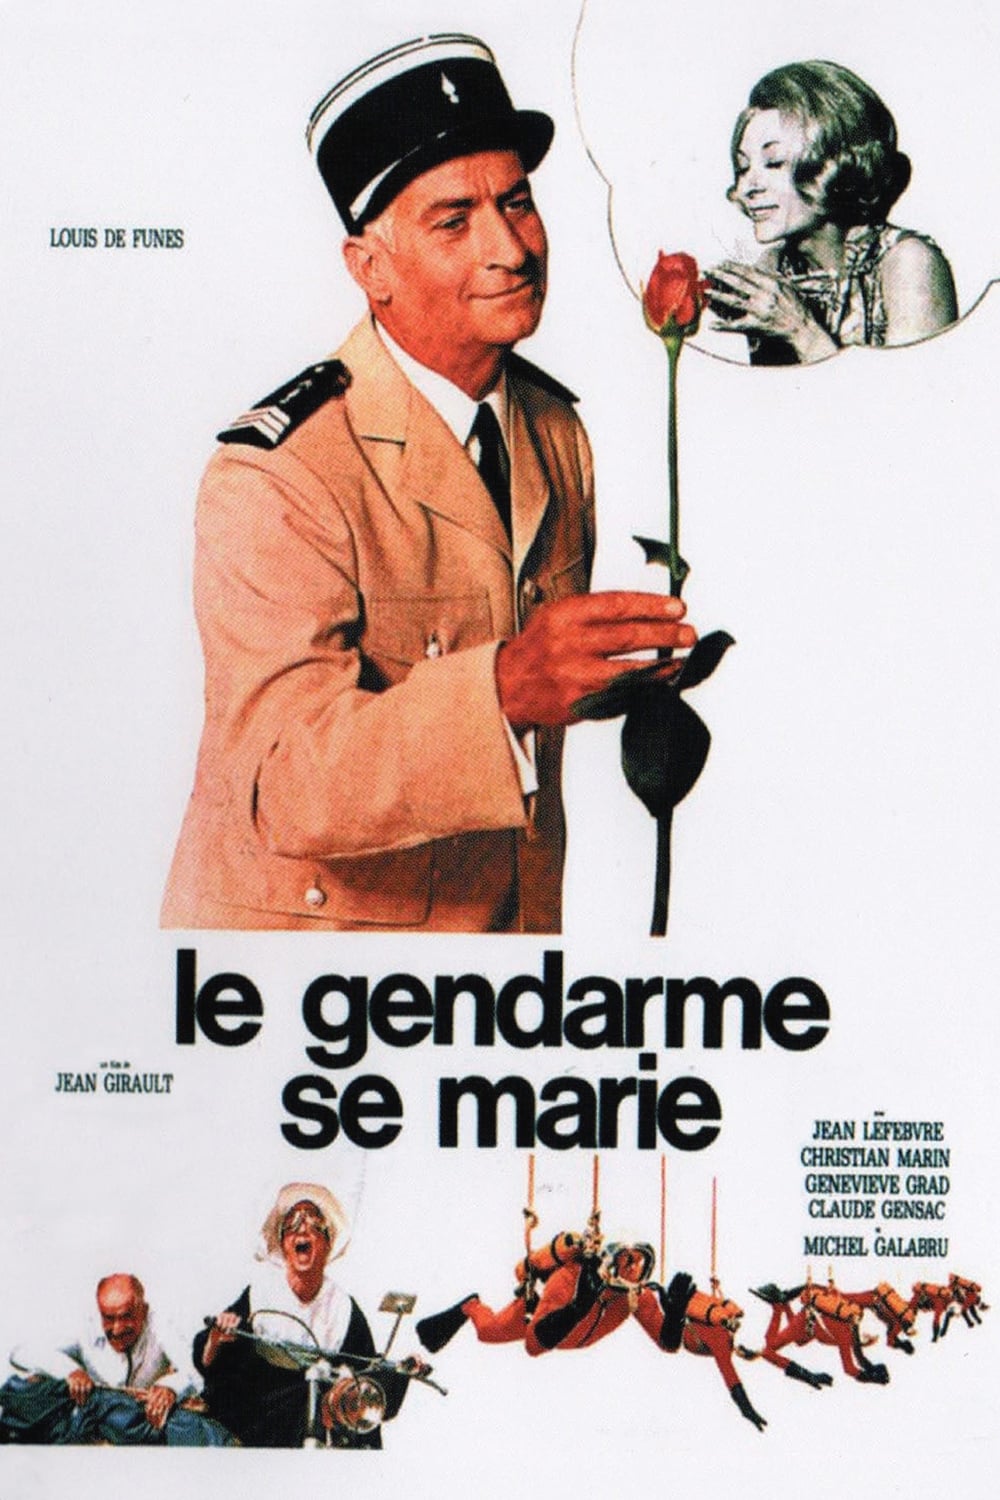 The Gendarme Gets Married (1968)